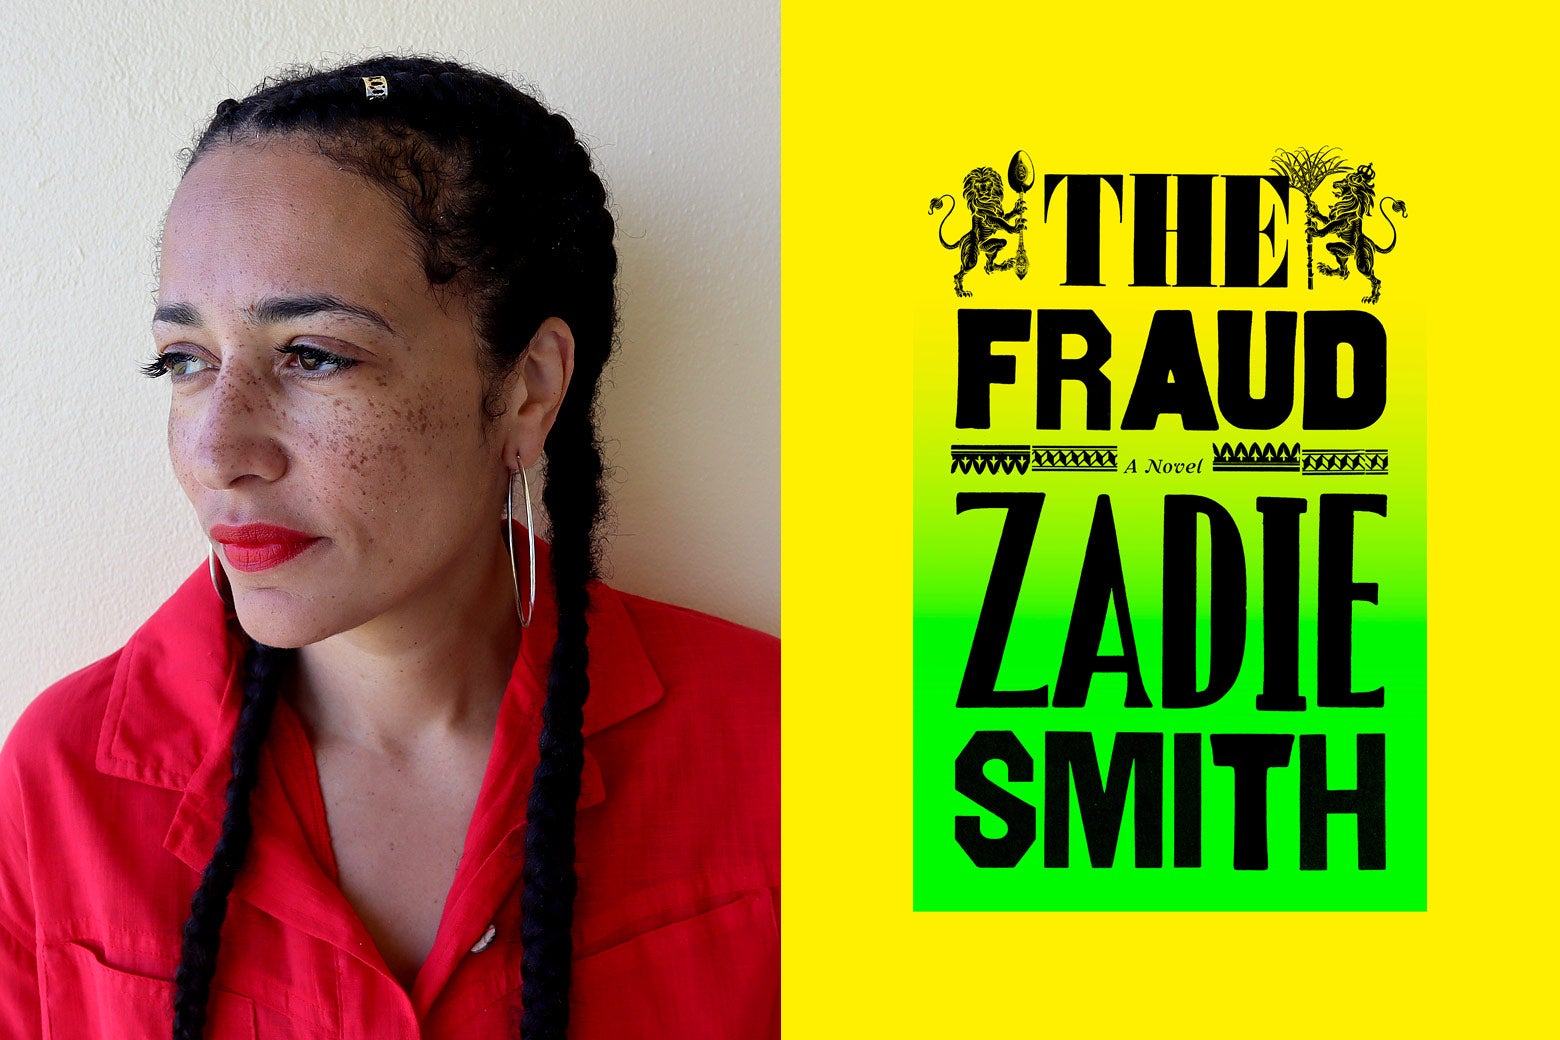 Zadie Smith Sees the Fraud in Us All Emily Bazelon